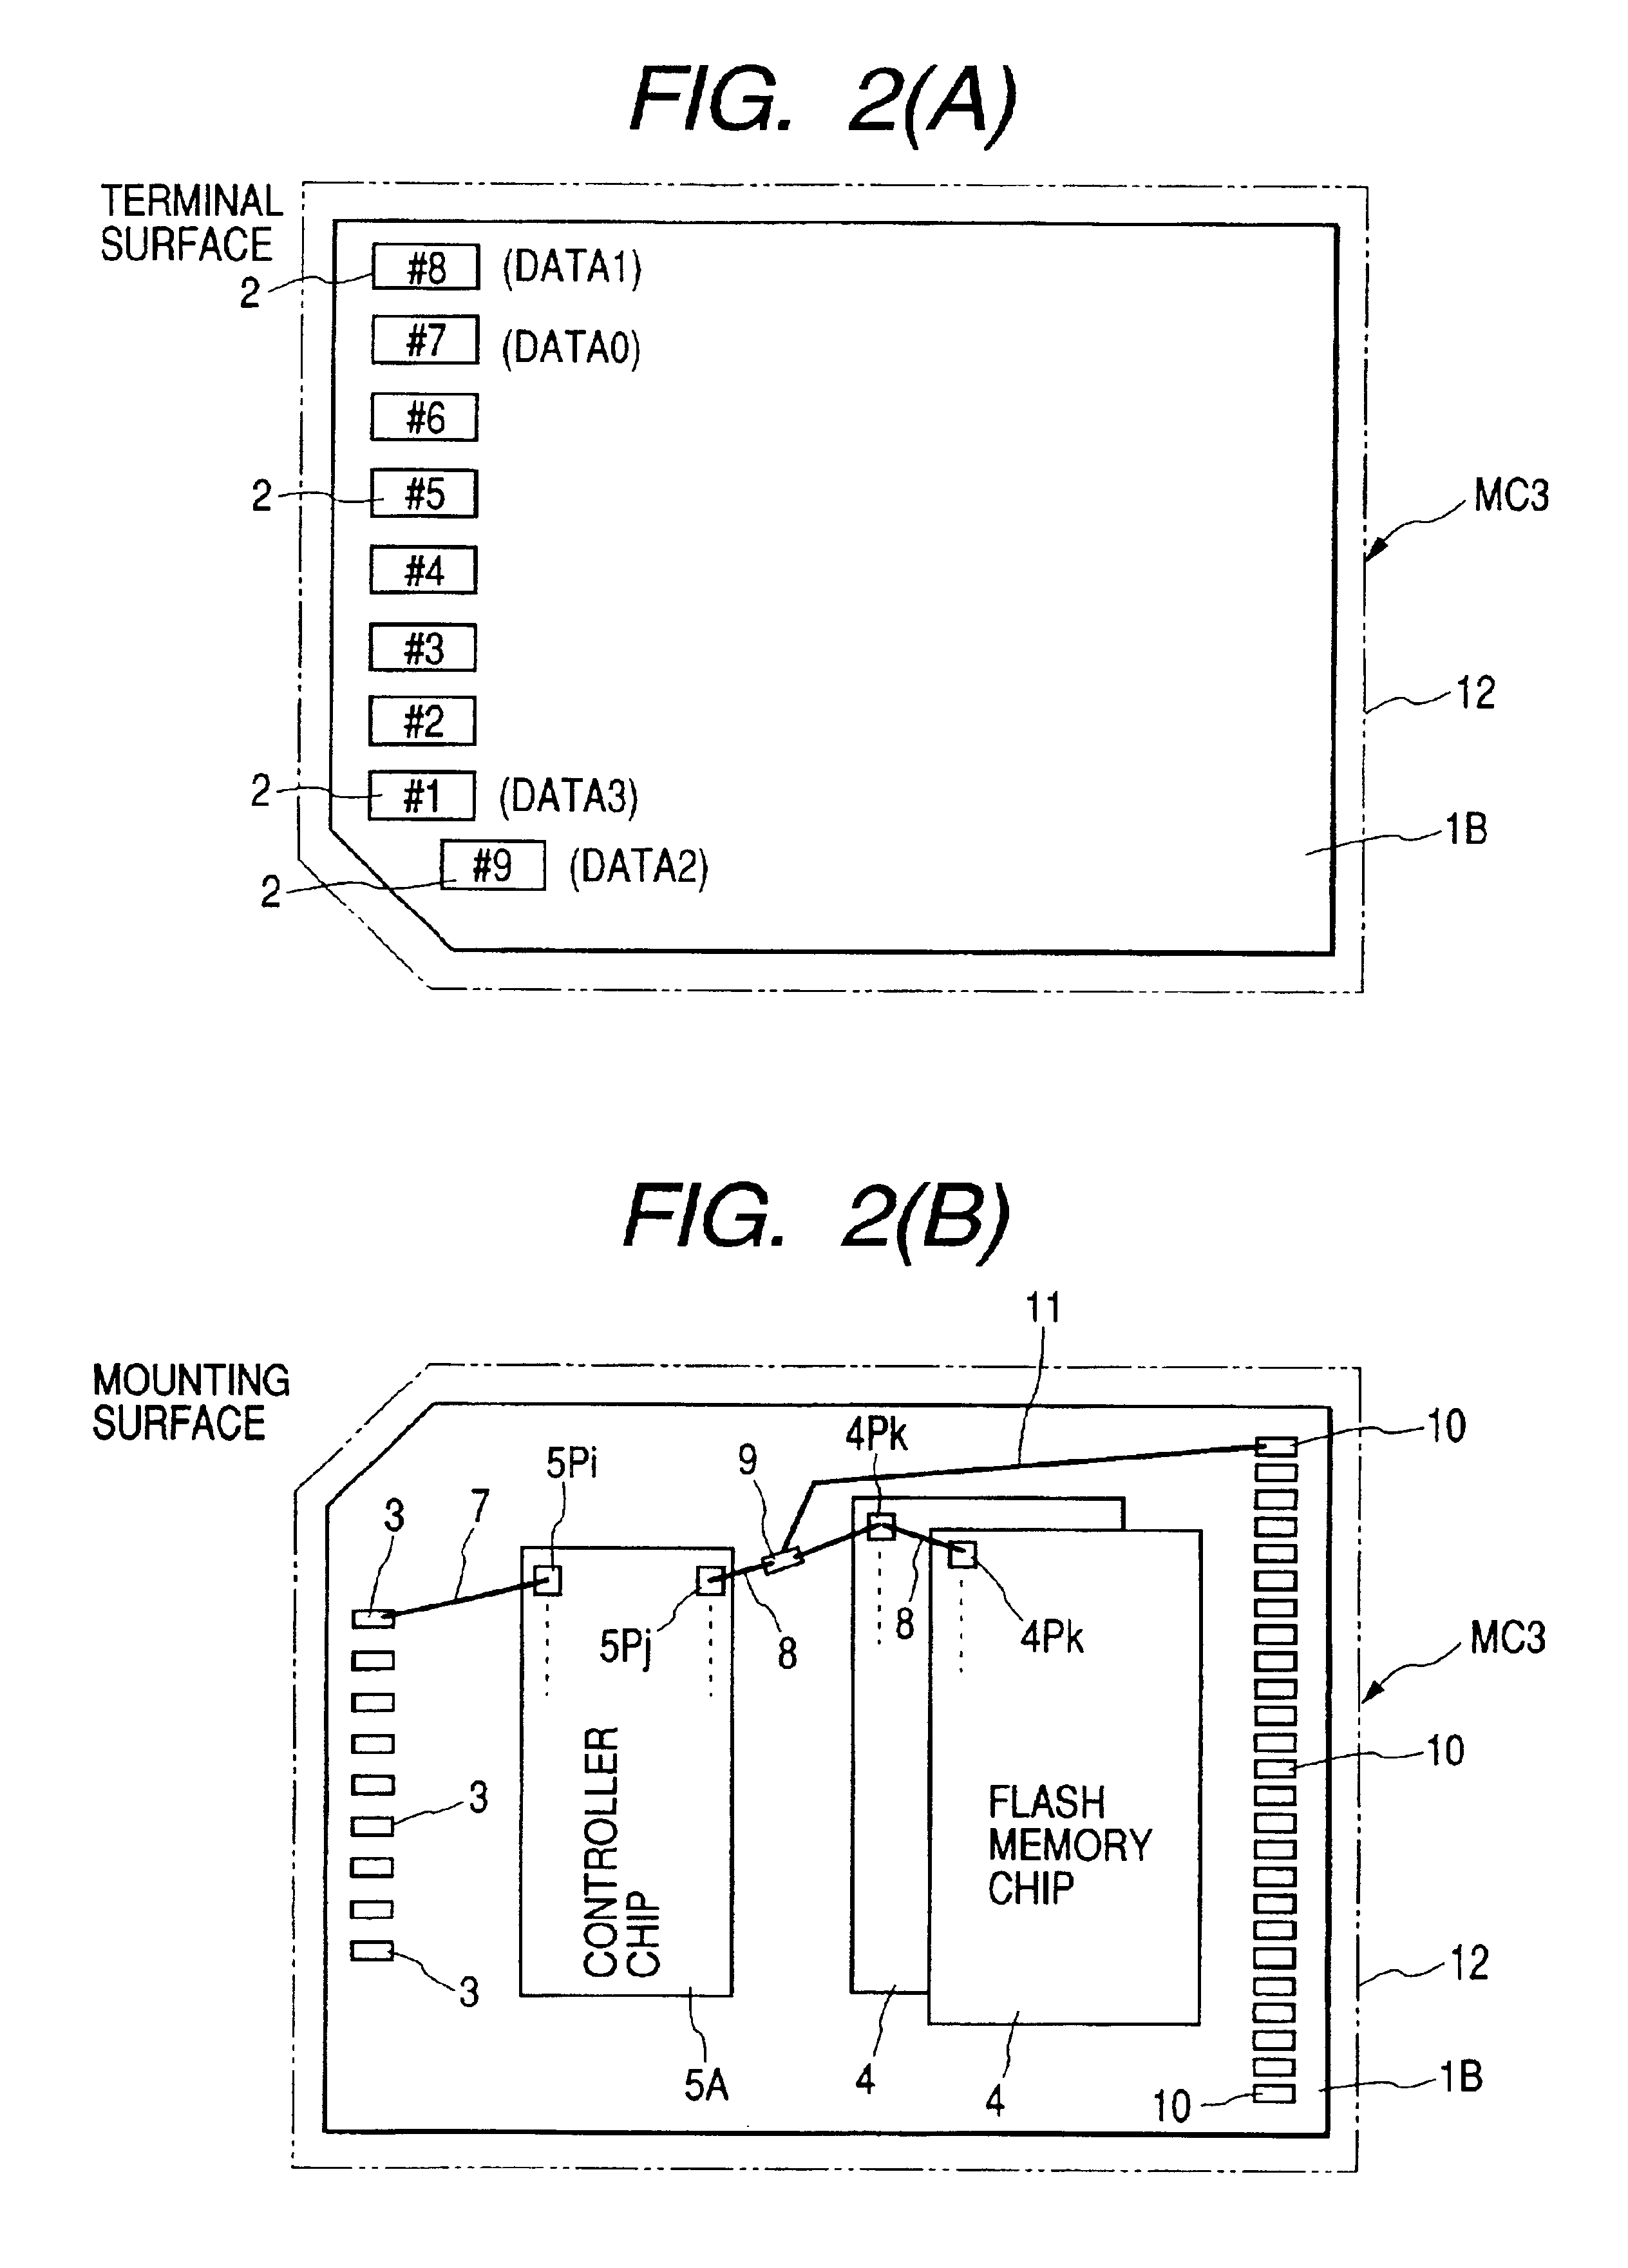 Integrated circuit card having staggered sequences of connector terminals